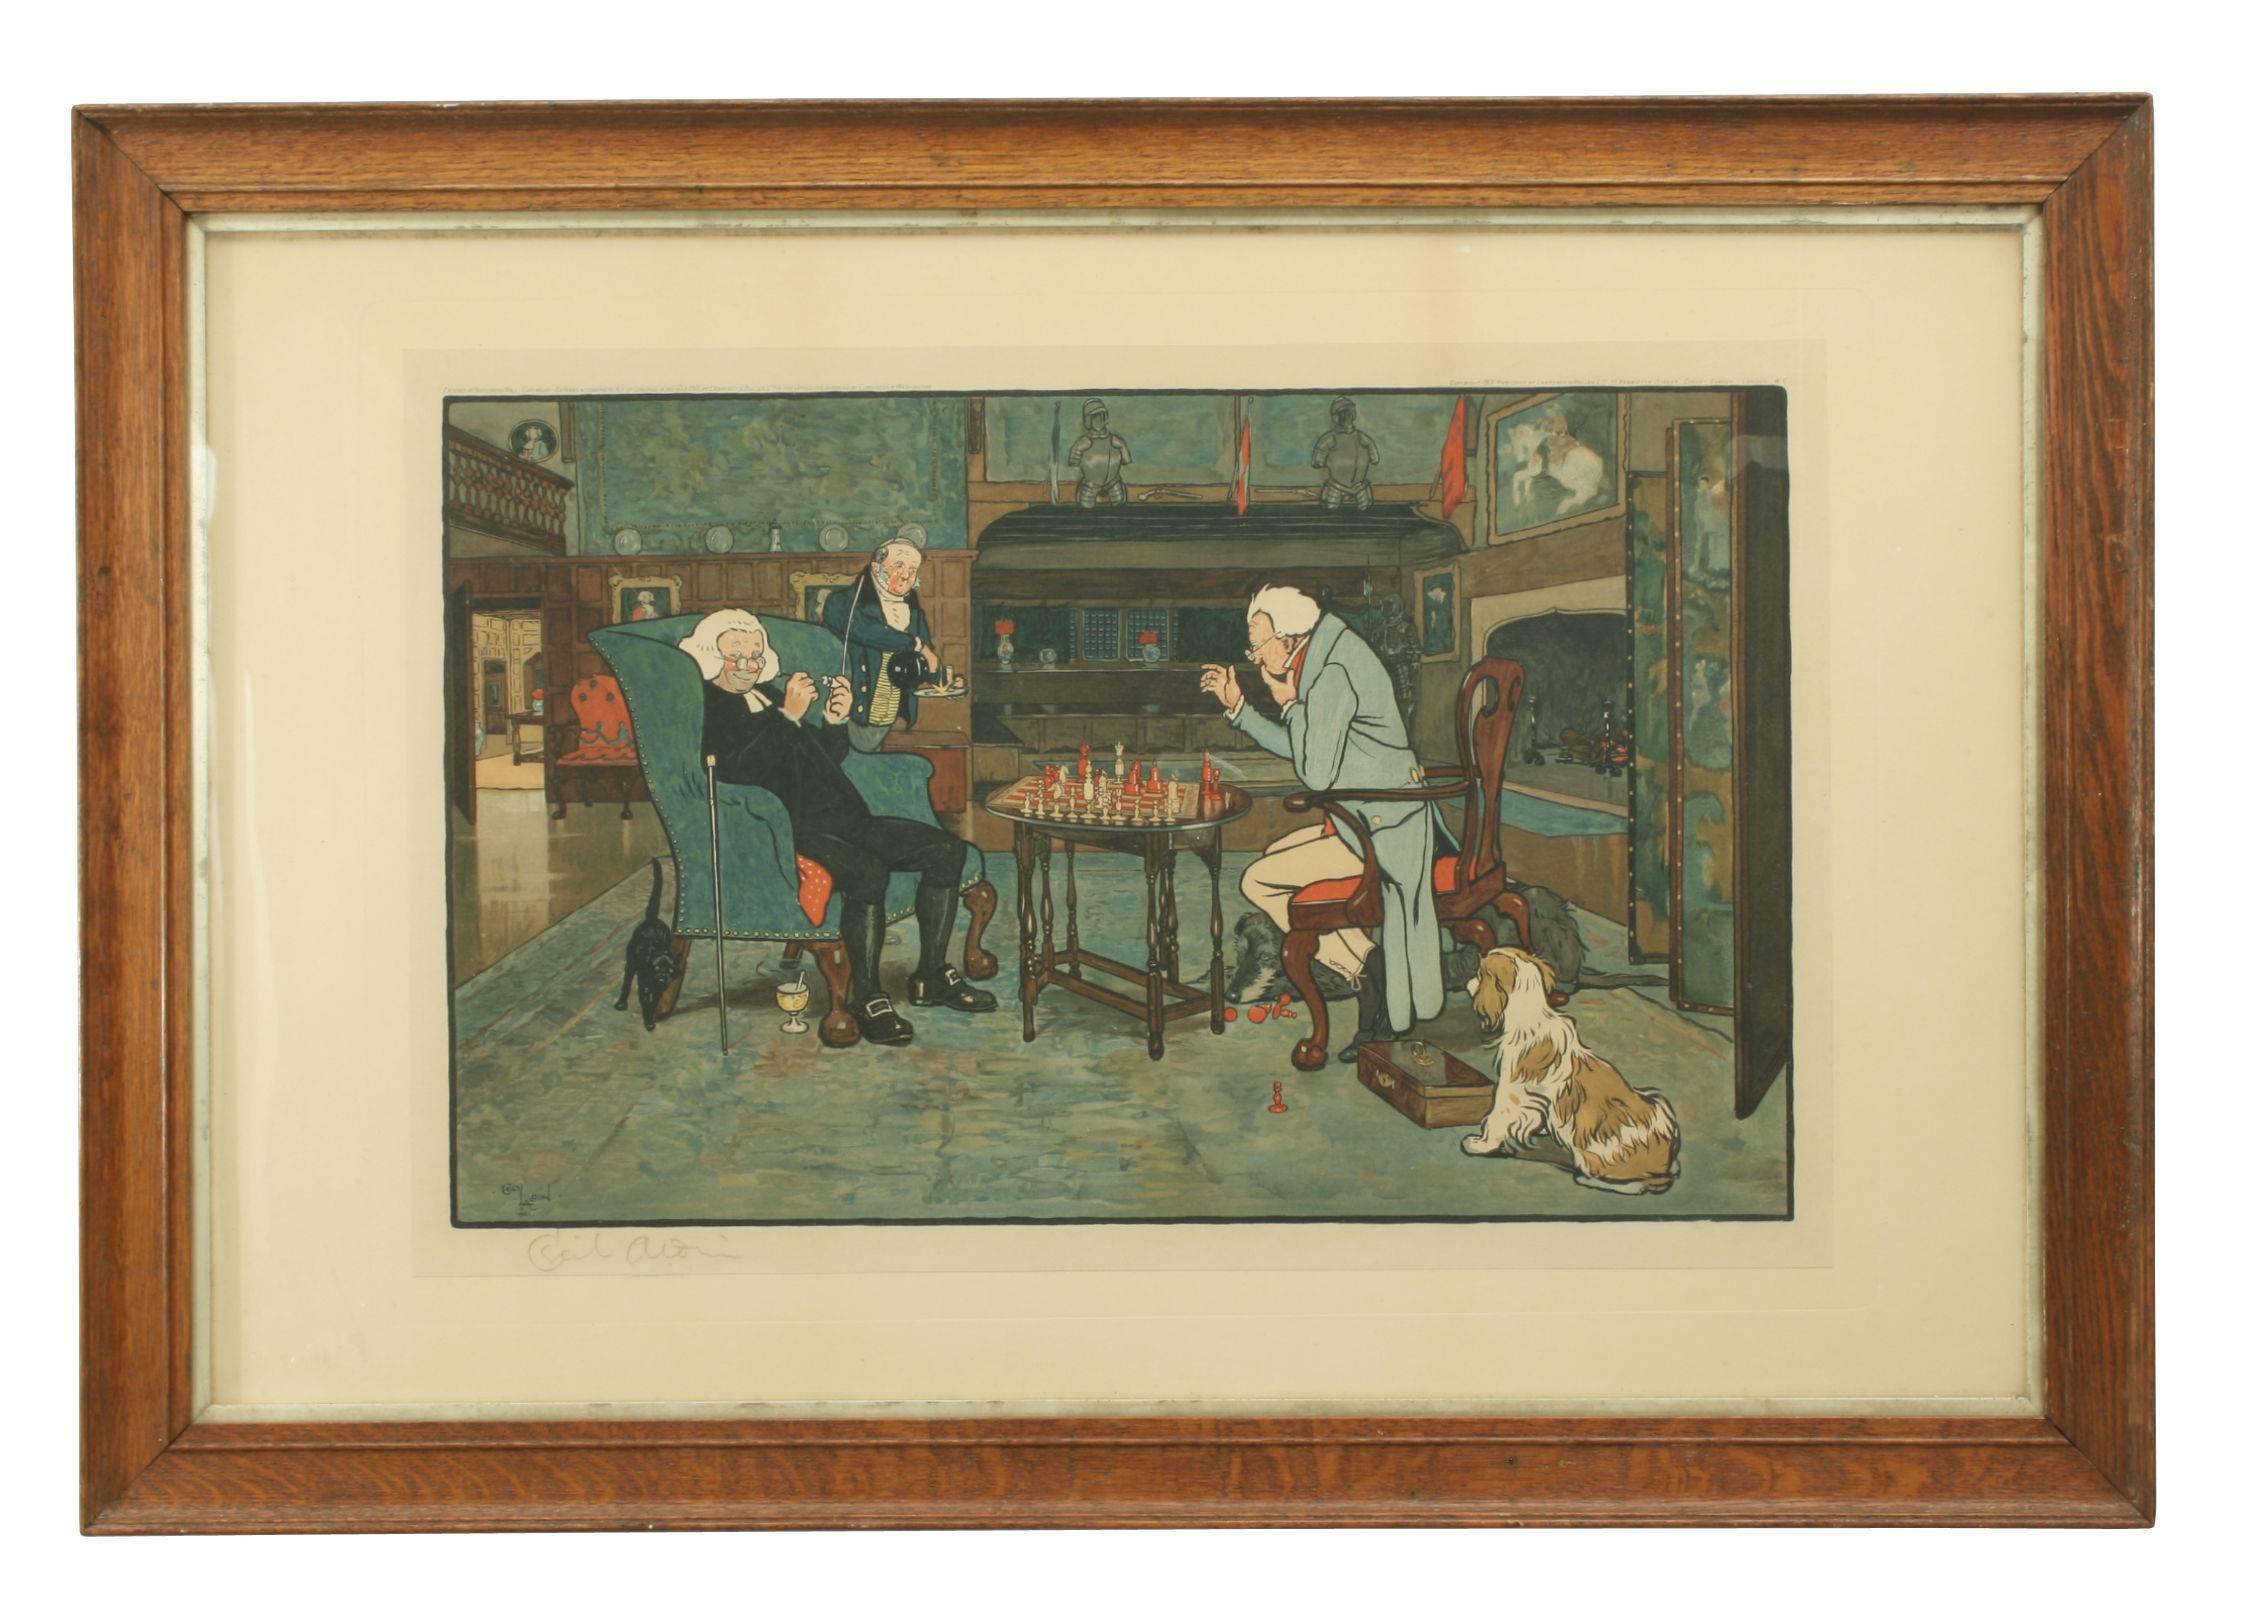 Vintage pair of Cecil Aldin prints 'Mated' and 'Revoked'.
A pair of rare original gaming chromolithographs by Cecil Aldin in the original oak frames. The colourful pictures are titled 'Mated' and 'Revoked' and each picture signed by the artist in